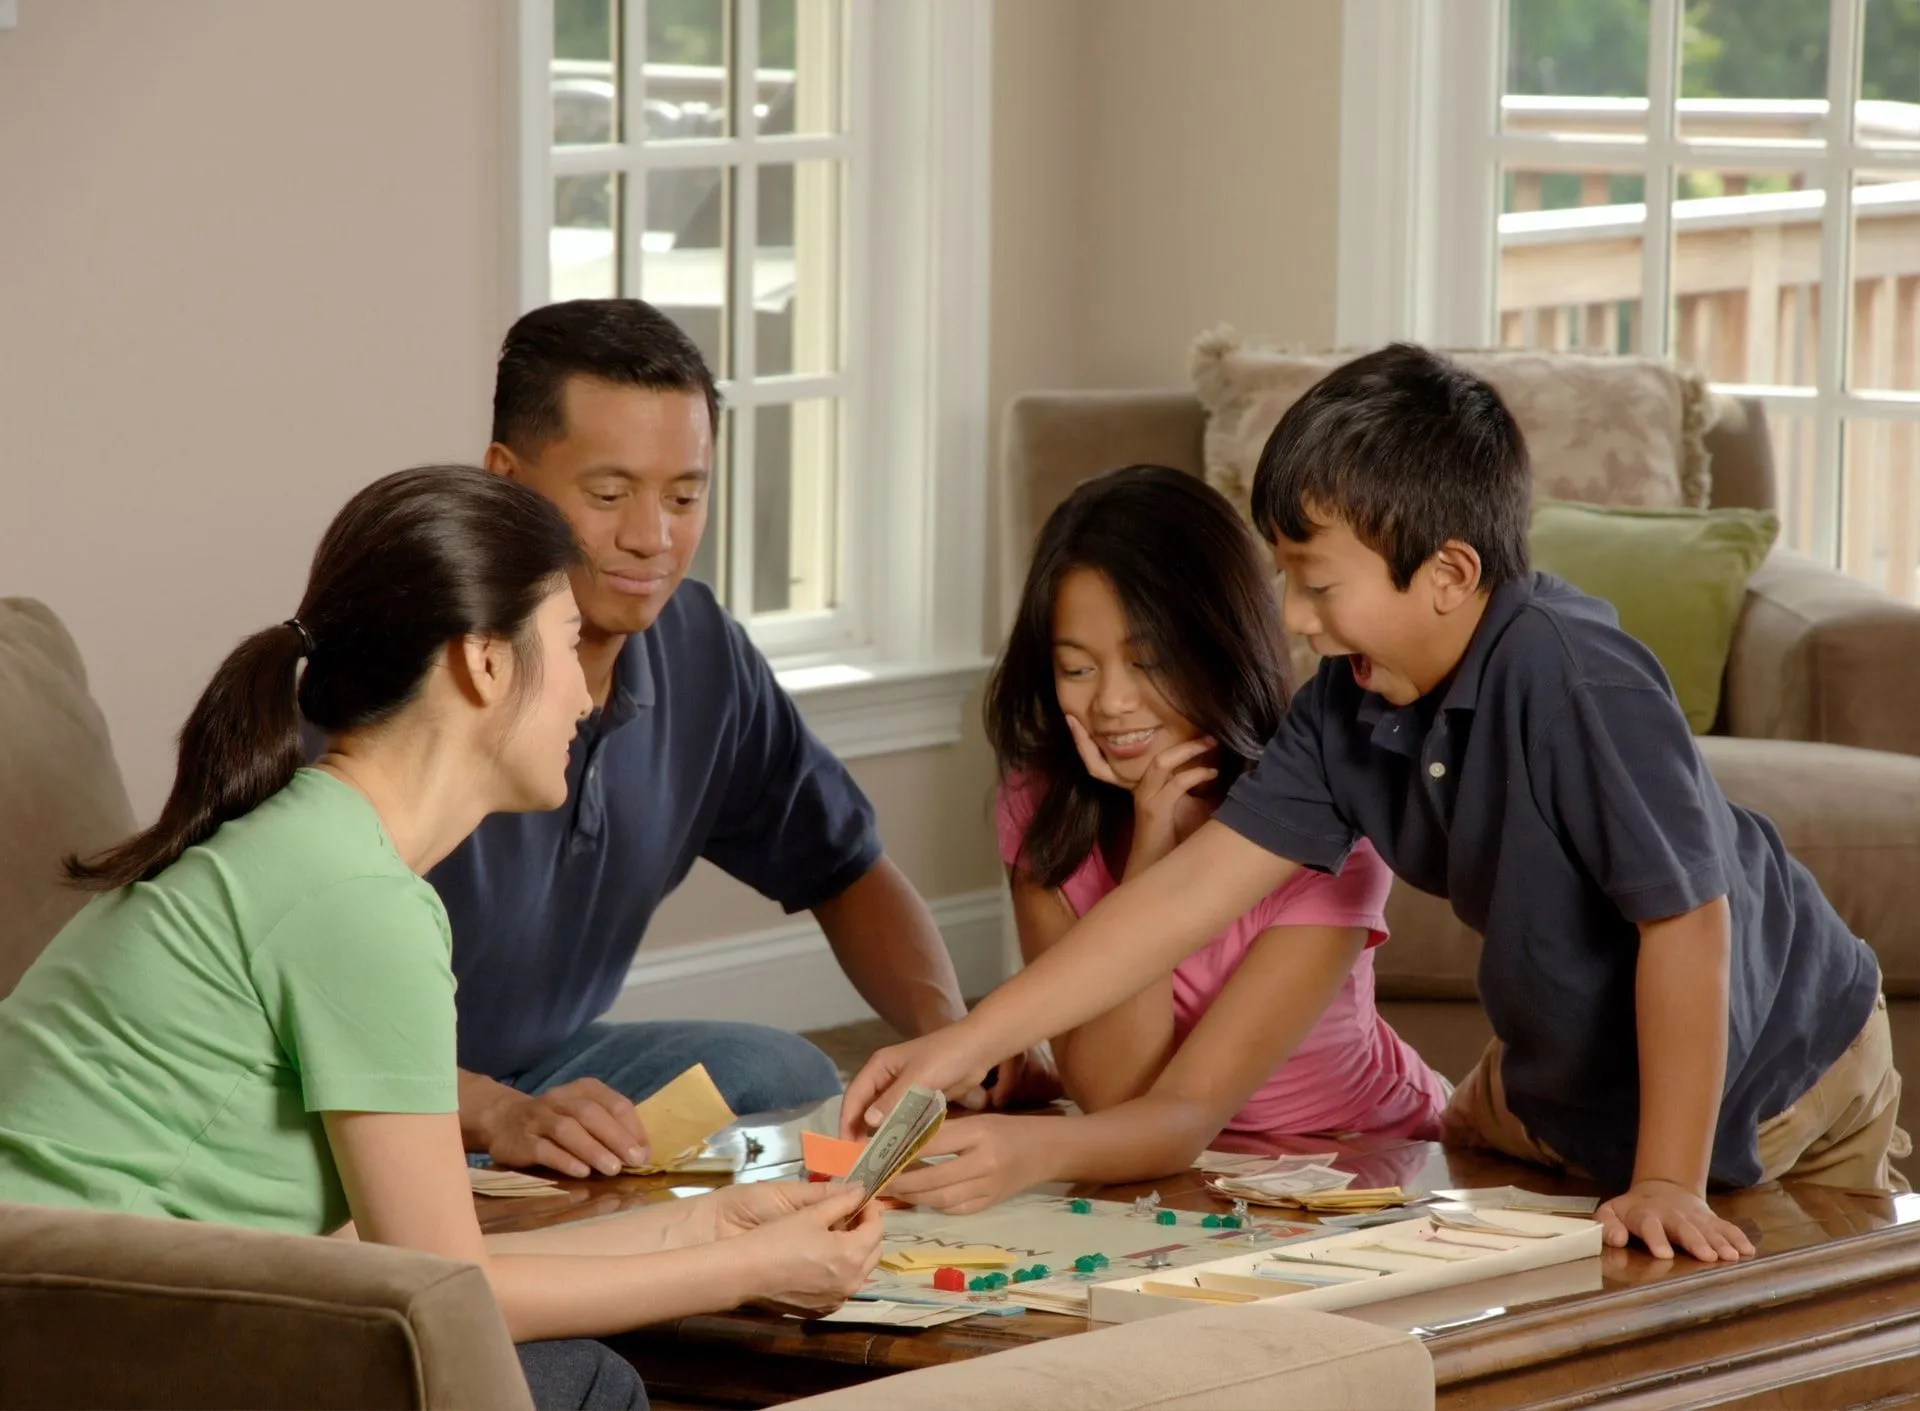 People often celebrate International Tabletop Day by playing board games with their families.